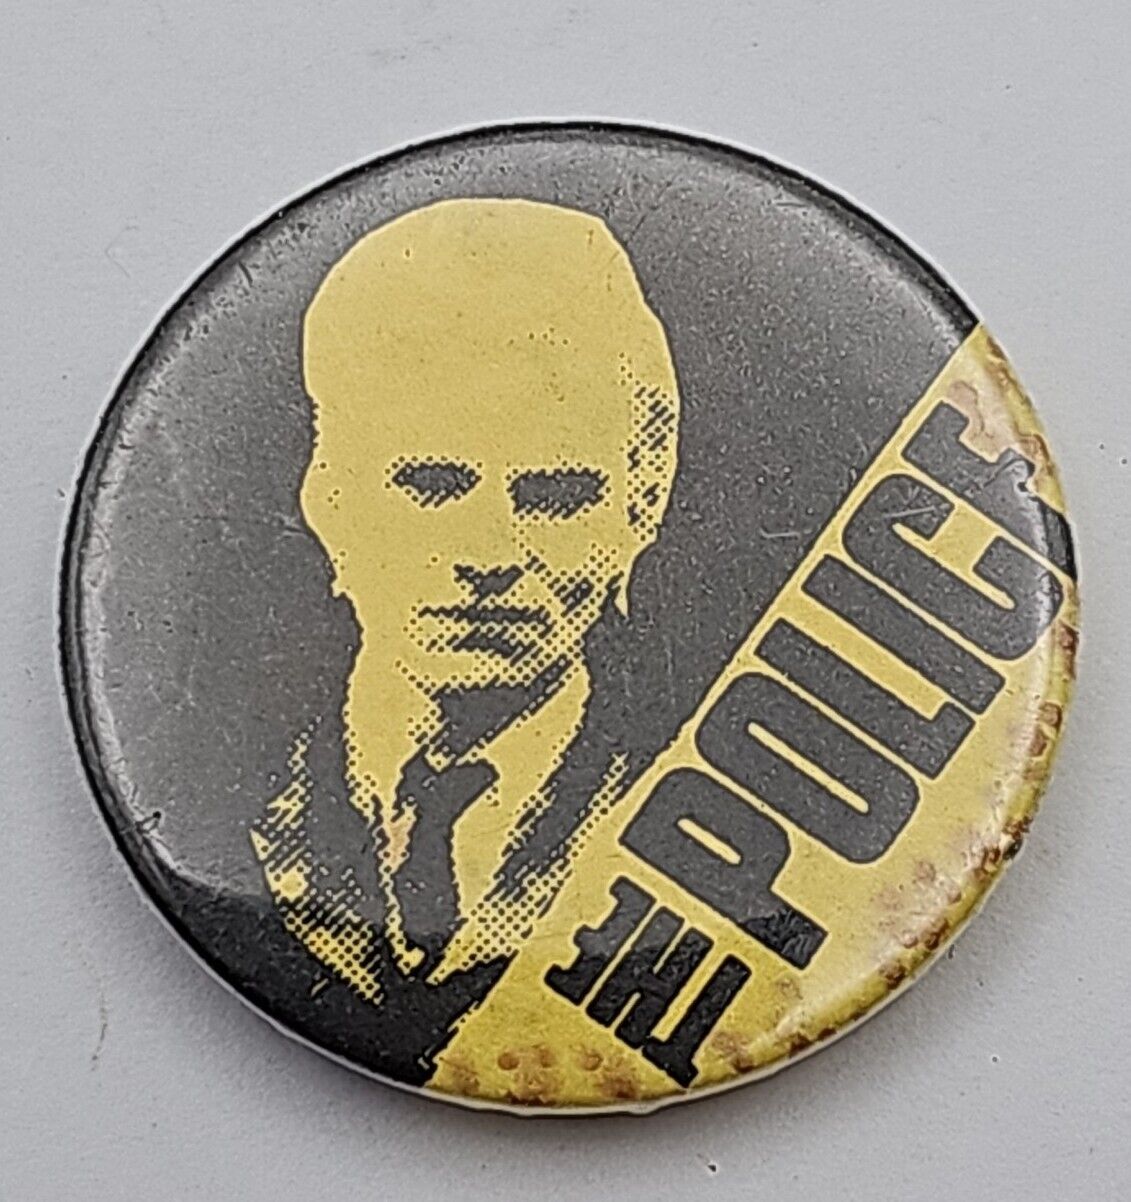 THE POLICE band Pin Vintage 80s button Badge Sting Original 1980s 25mm Diameter